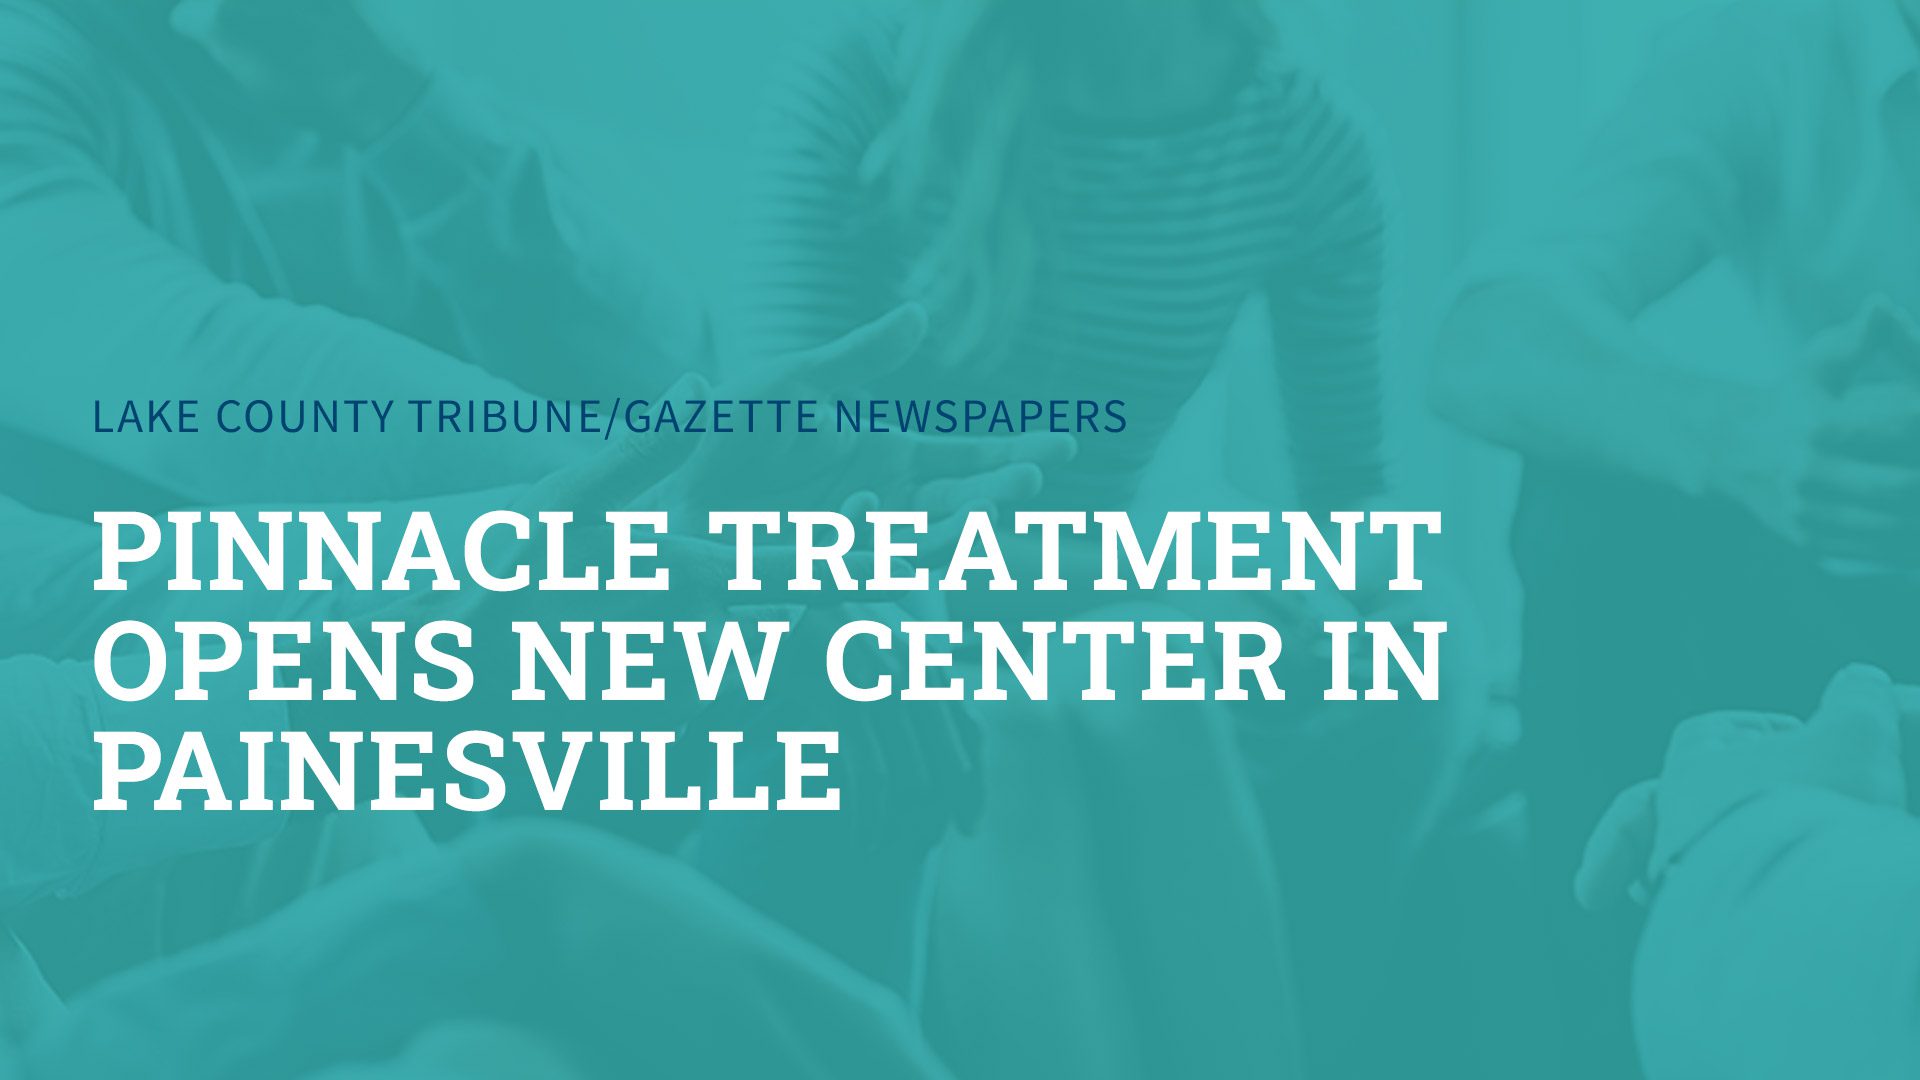 Pinnacle treatment opens new center in Painesville